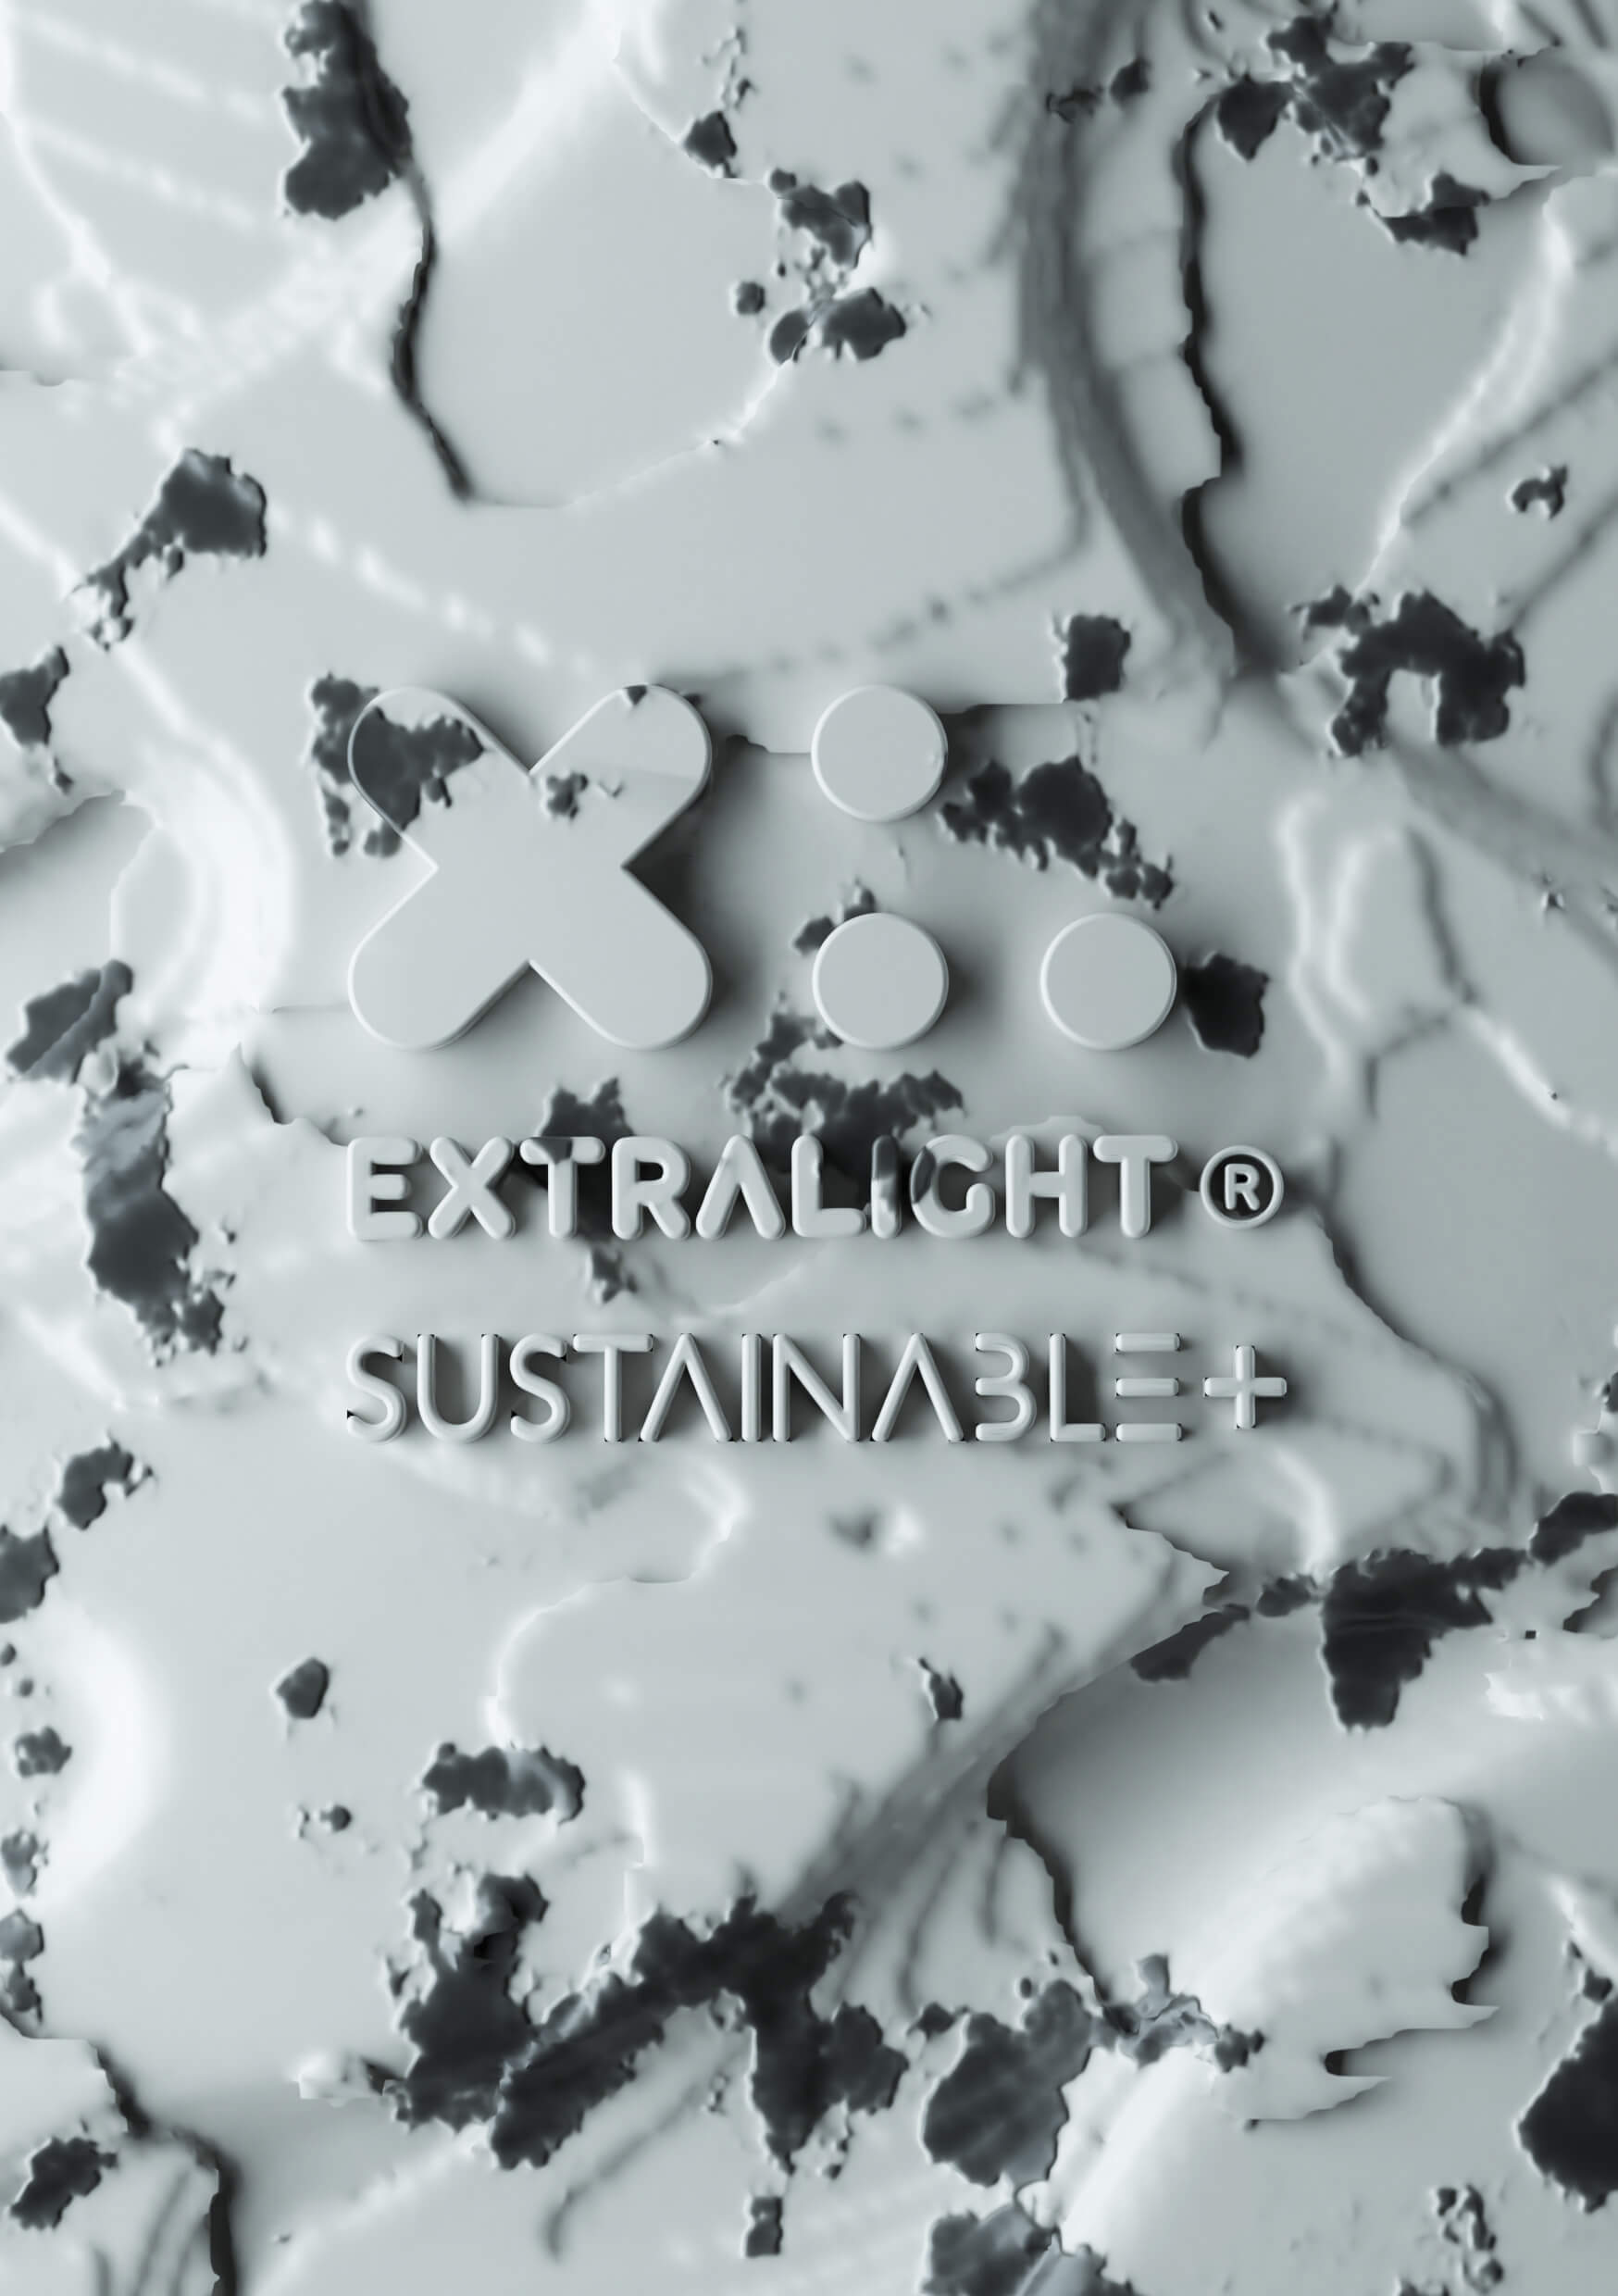 LOGO_xl.jpg image from XIRCULAR SUSTAINABLE+ RAL7000STUDIO project created on 2021-12-01